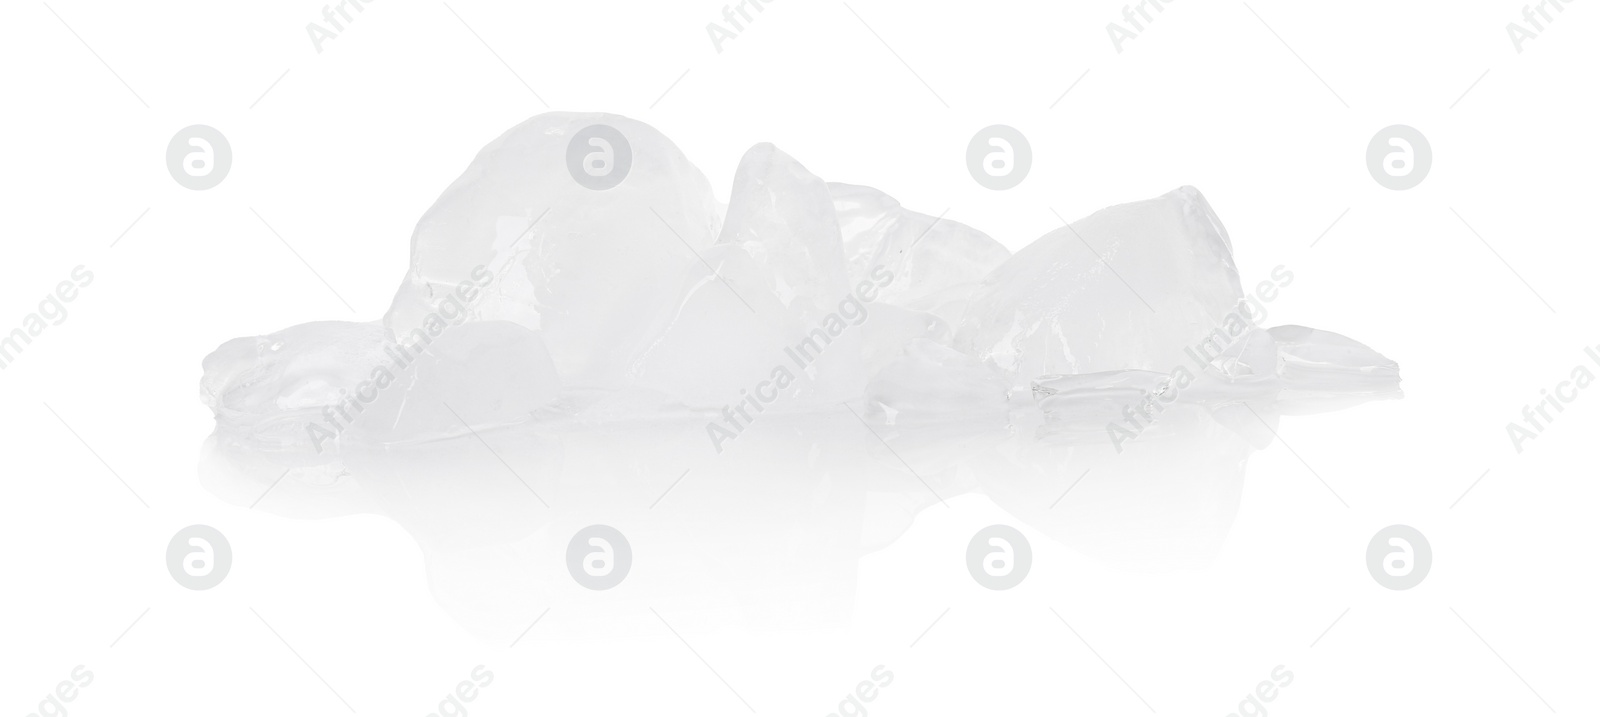 Photo of Pieces of clear ice isolated on white